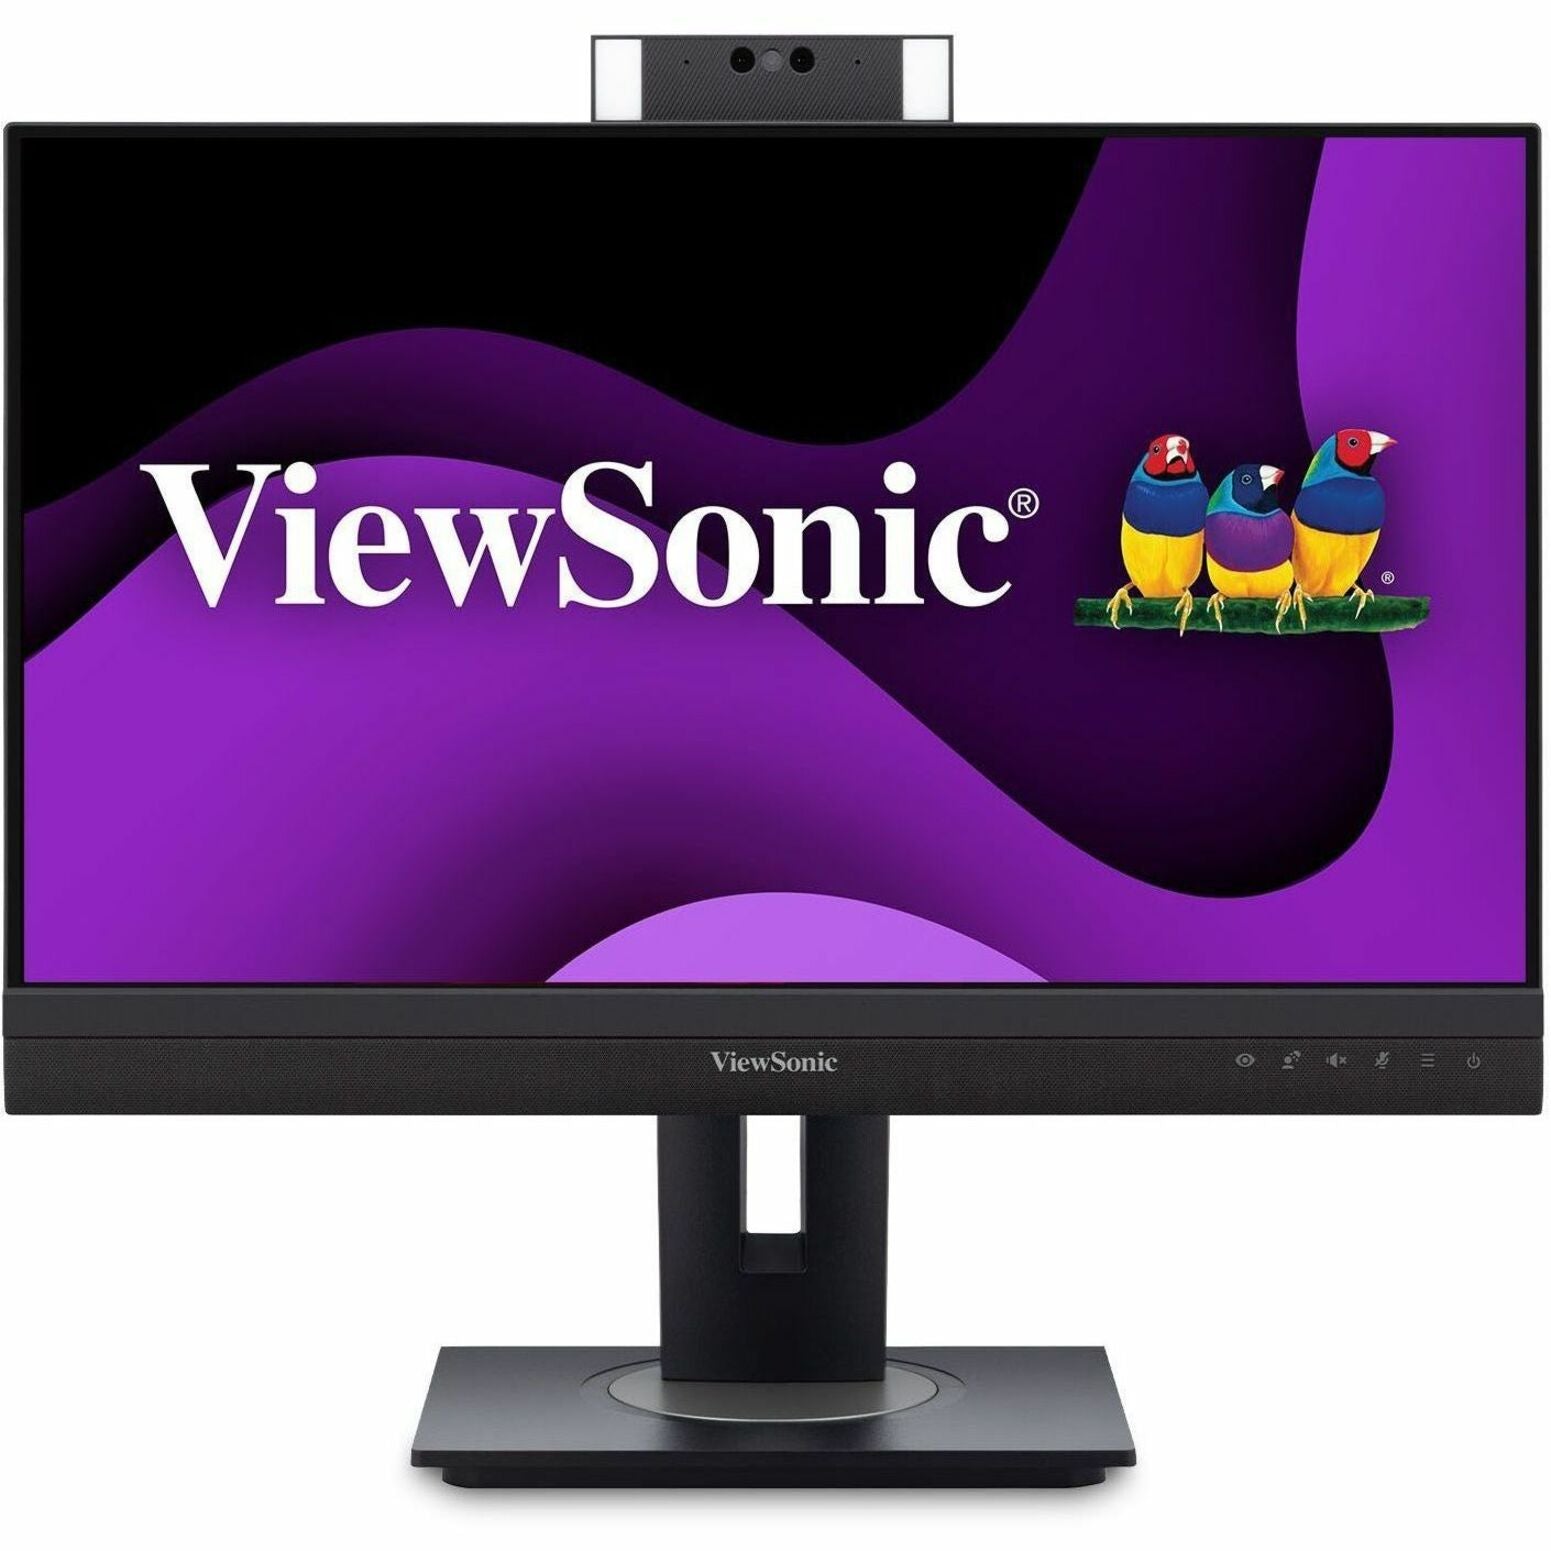 ViewSonic 24IN 1080P VIDEO CONFERENCING MONITOR WITH WINDOWS HELLO COMPATIBLE IR WEBCAM, 9 (VG2457V)